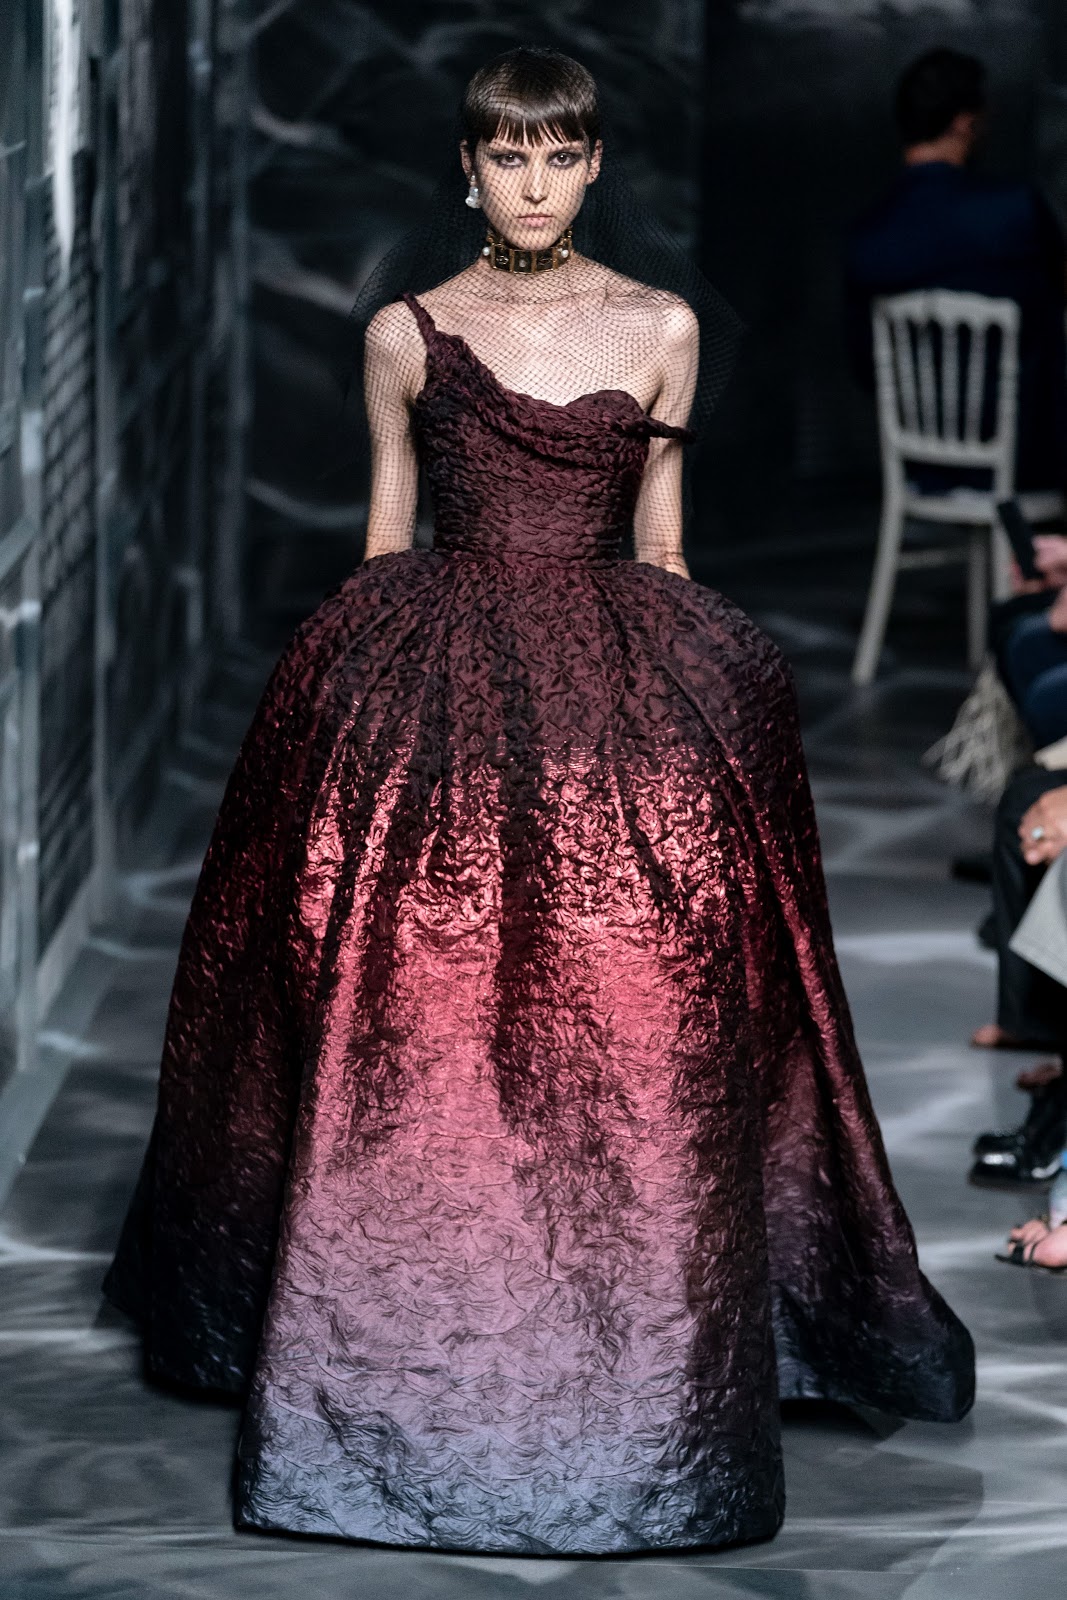 Christian Dior Haute Couture Fall-Winter 2019 | Cool Chic Style Fashion